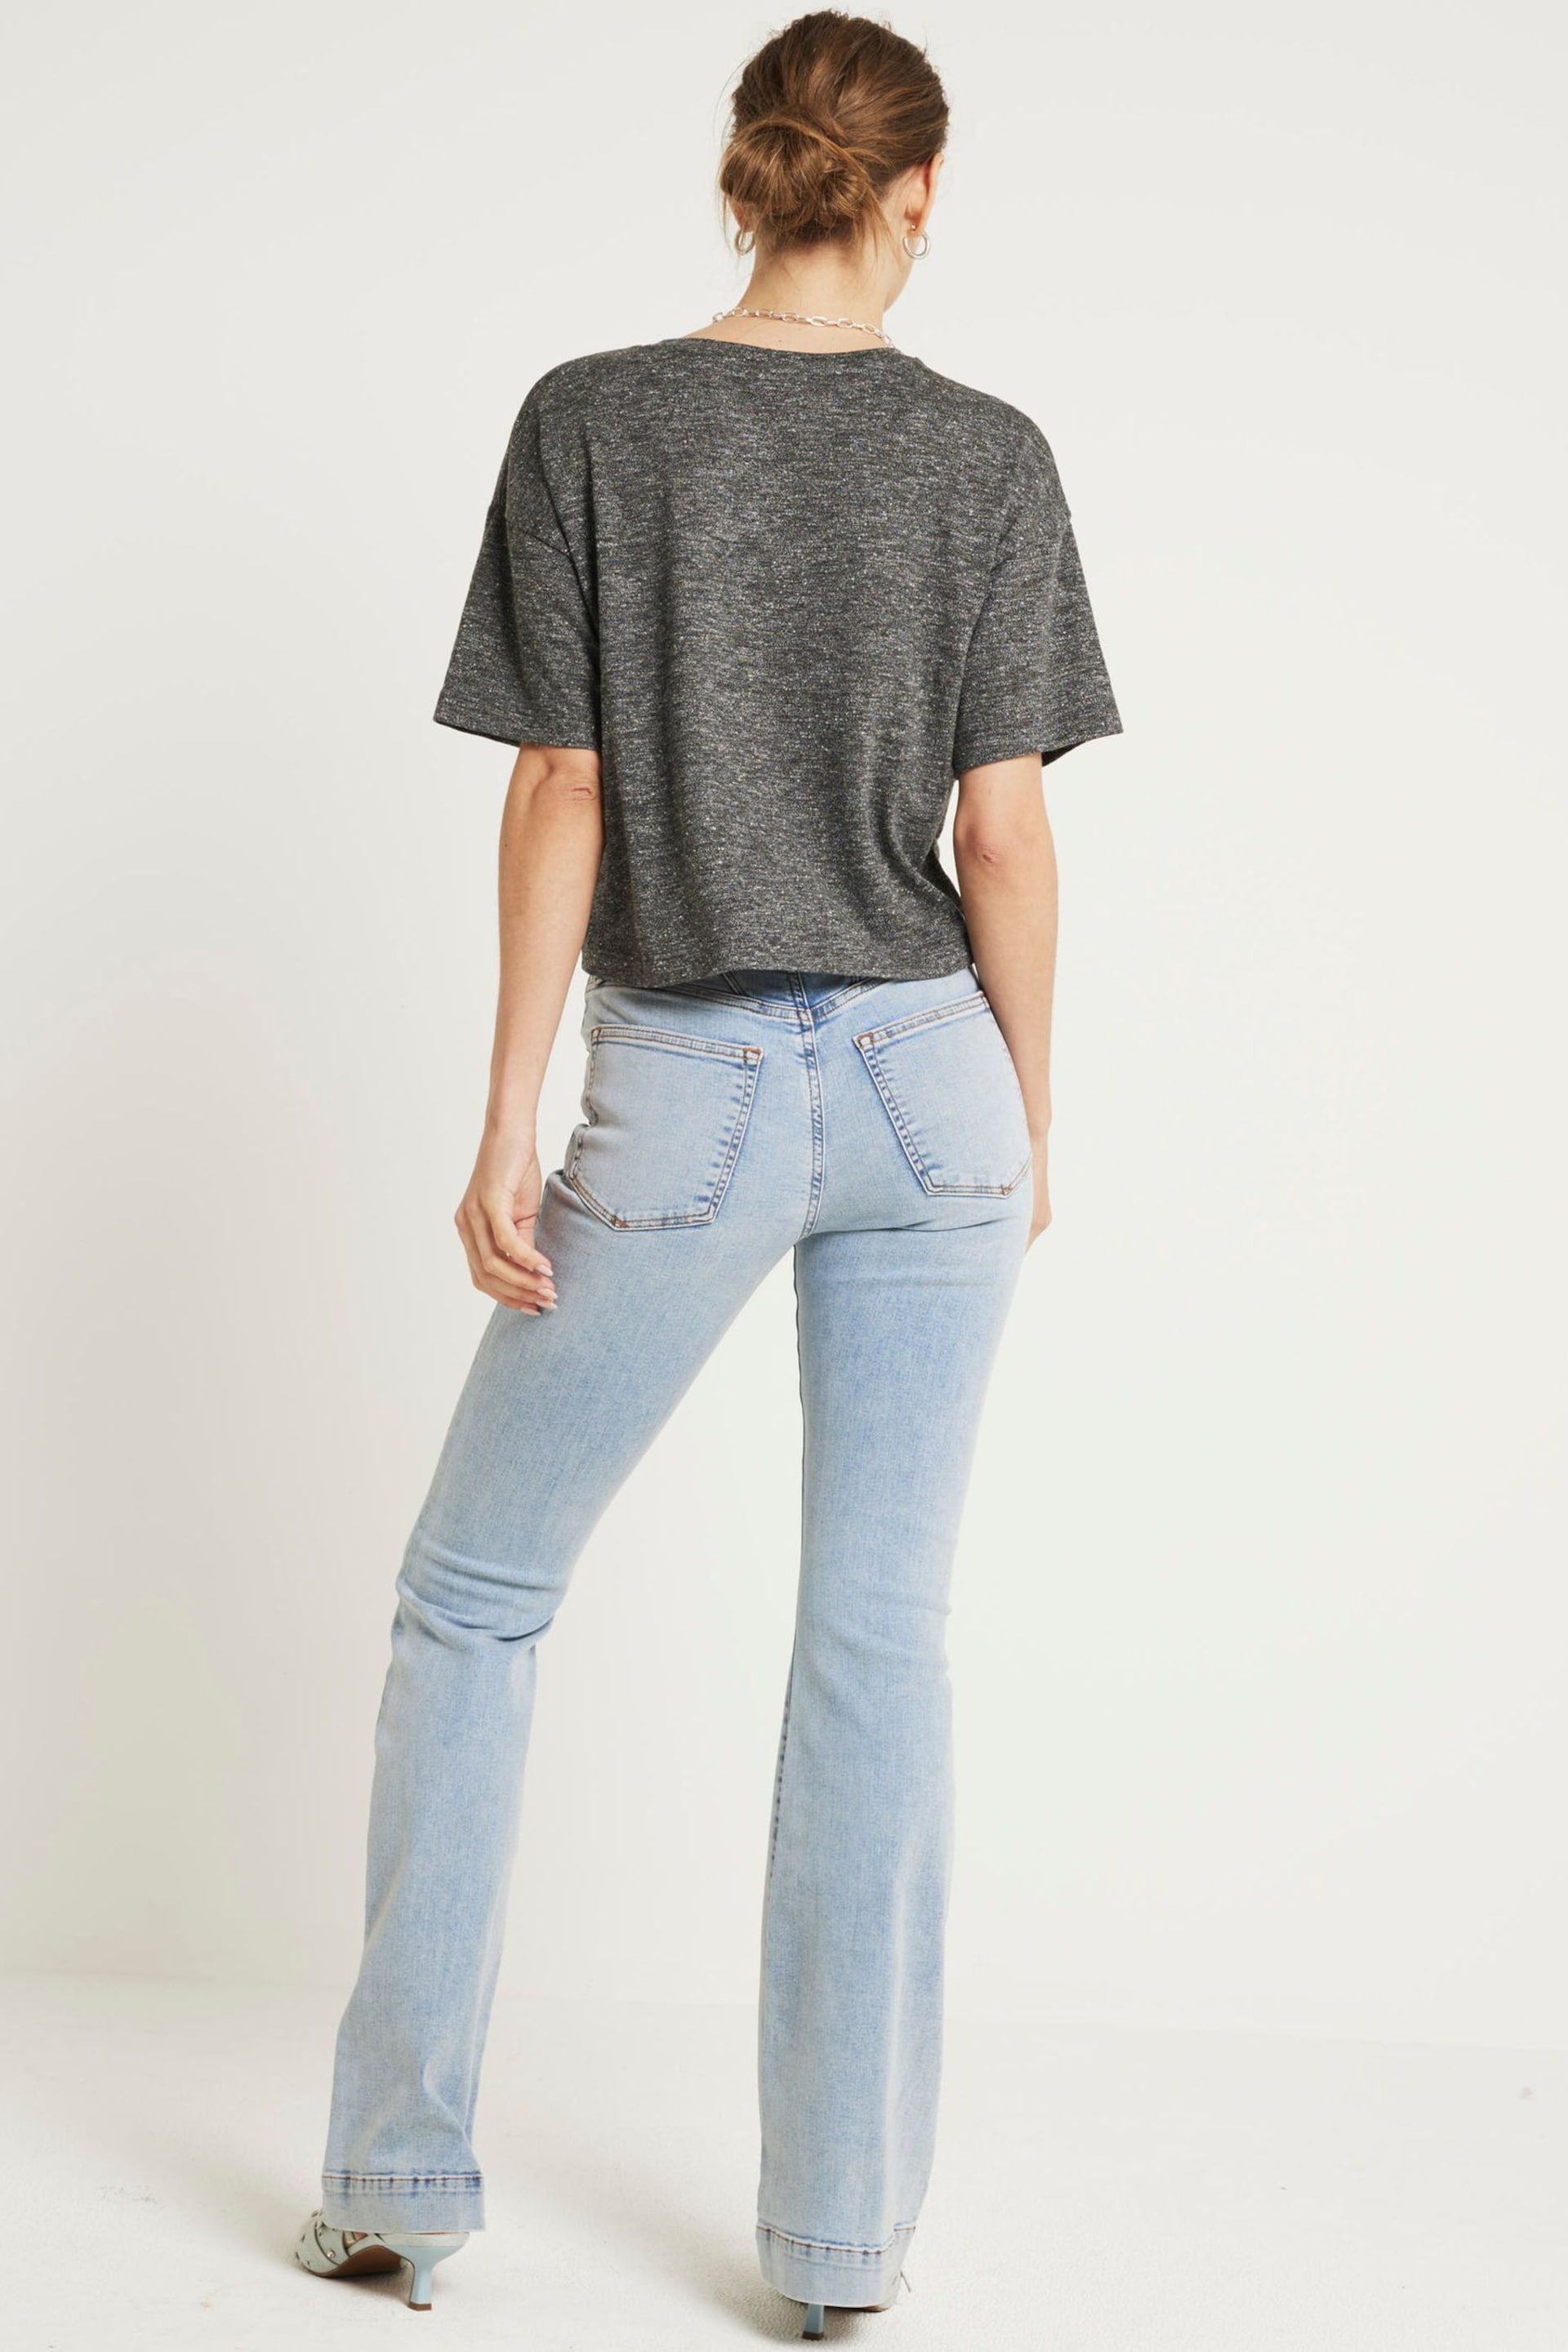 River Island Blue High Rise Tummy Hold Flare Jeans - Image 2 of 4